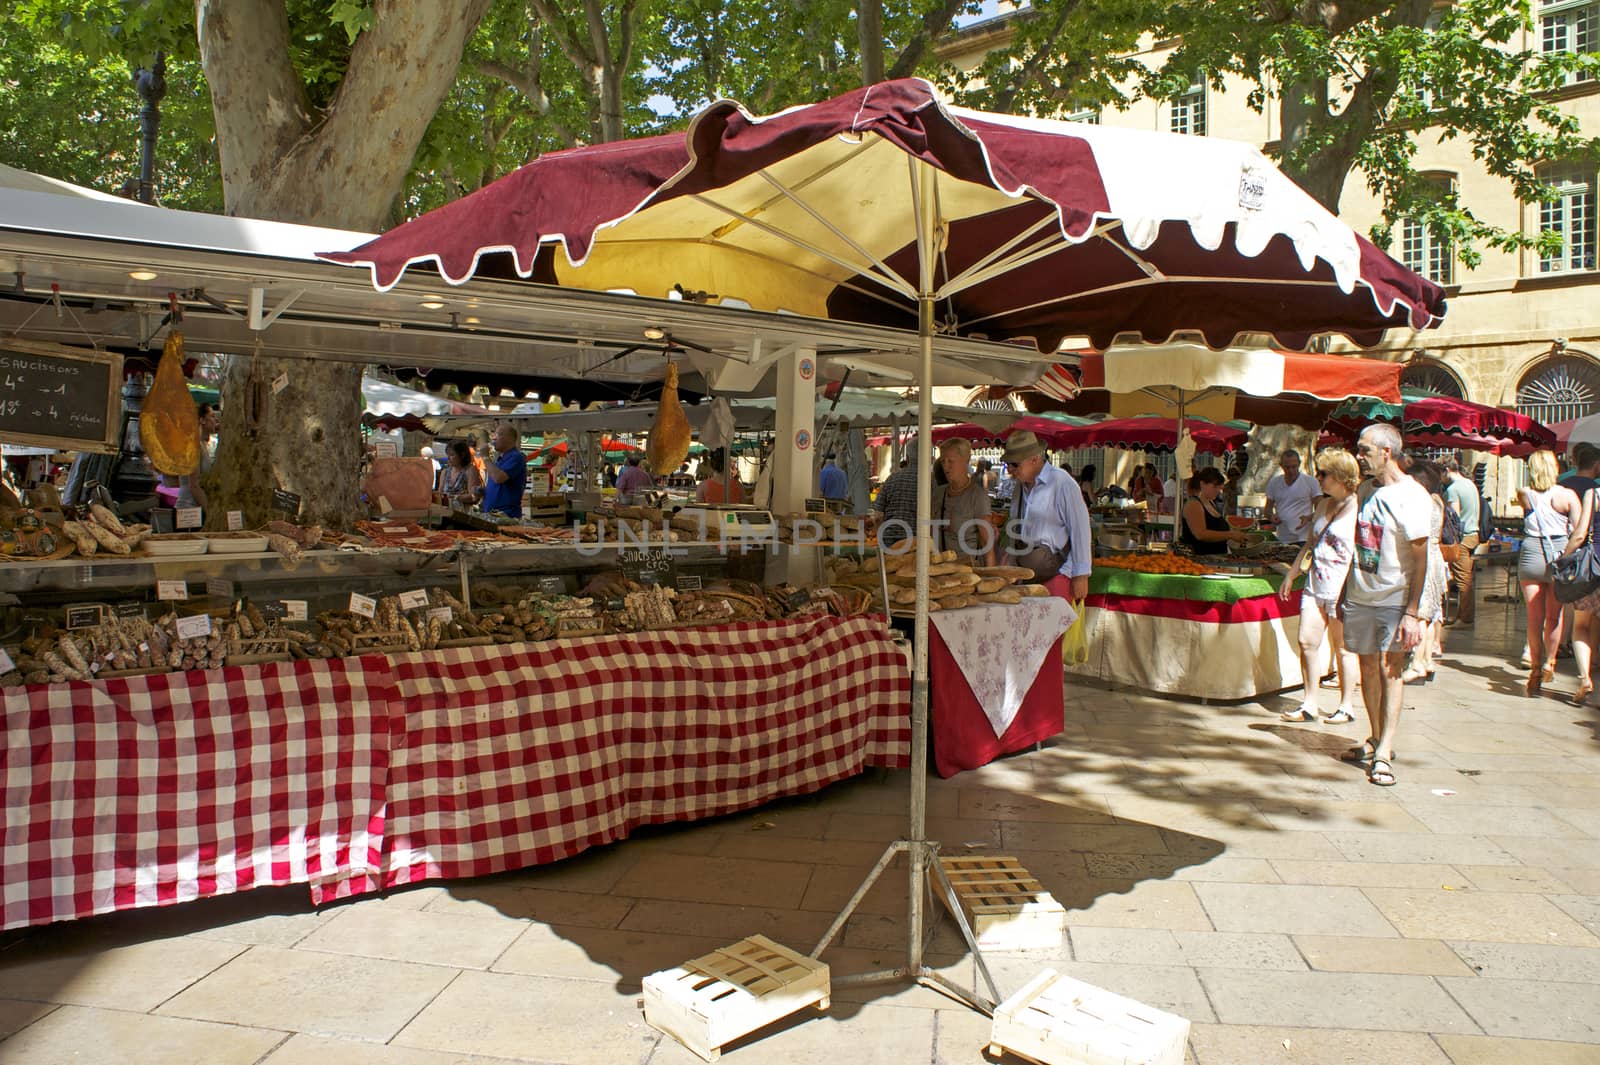 Outdoor market located in Aix-en-Provence, a small city in Provence, France